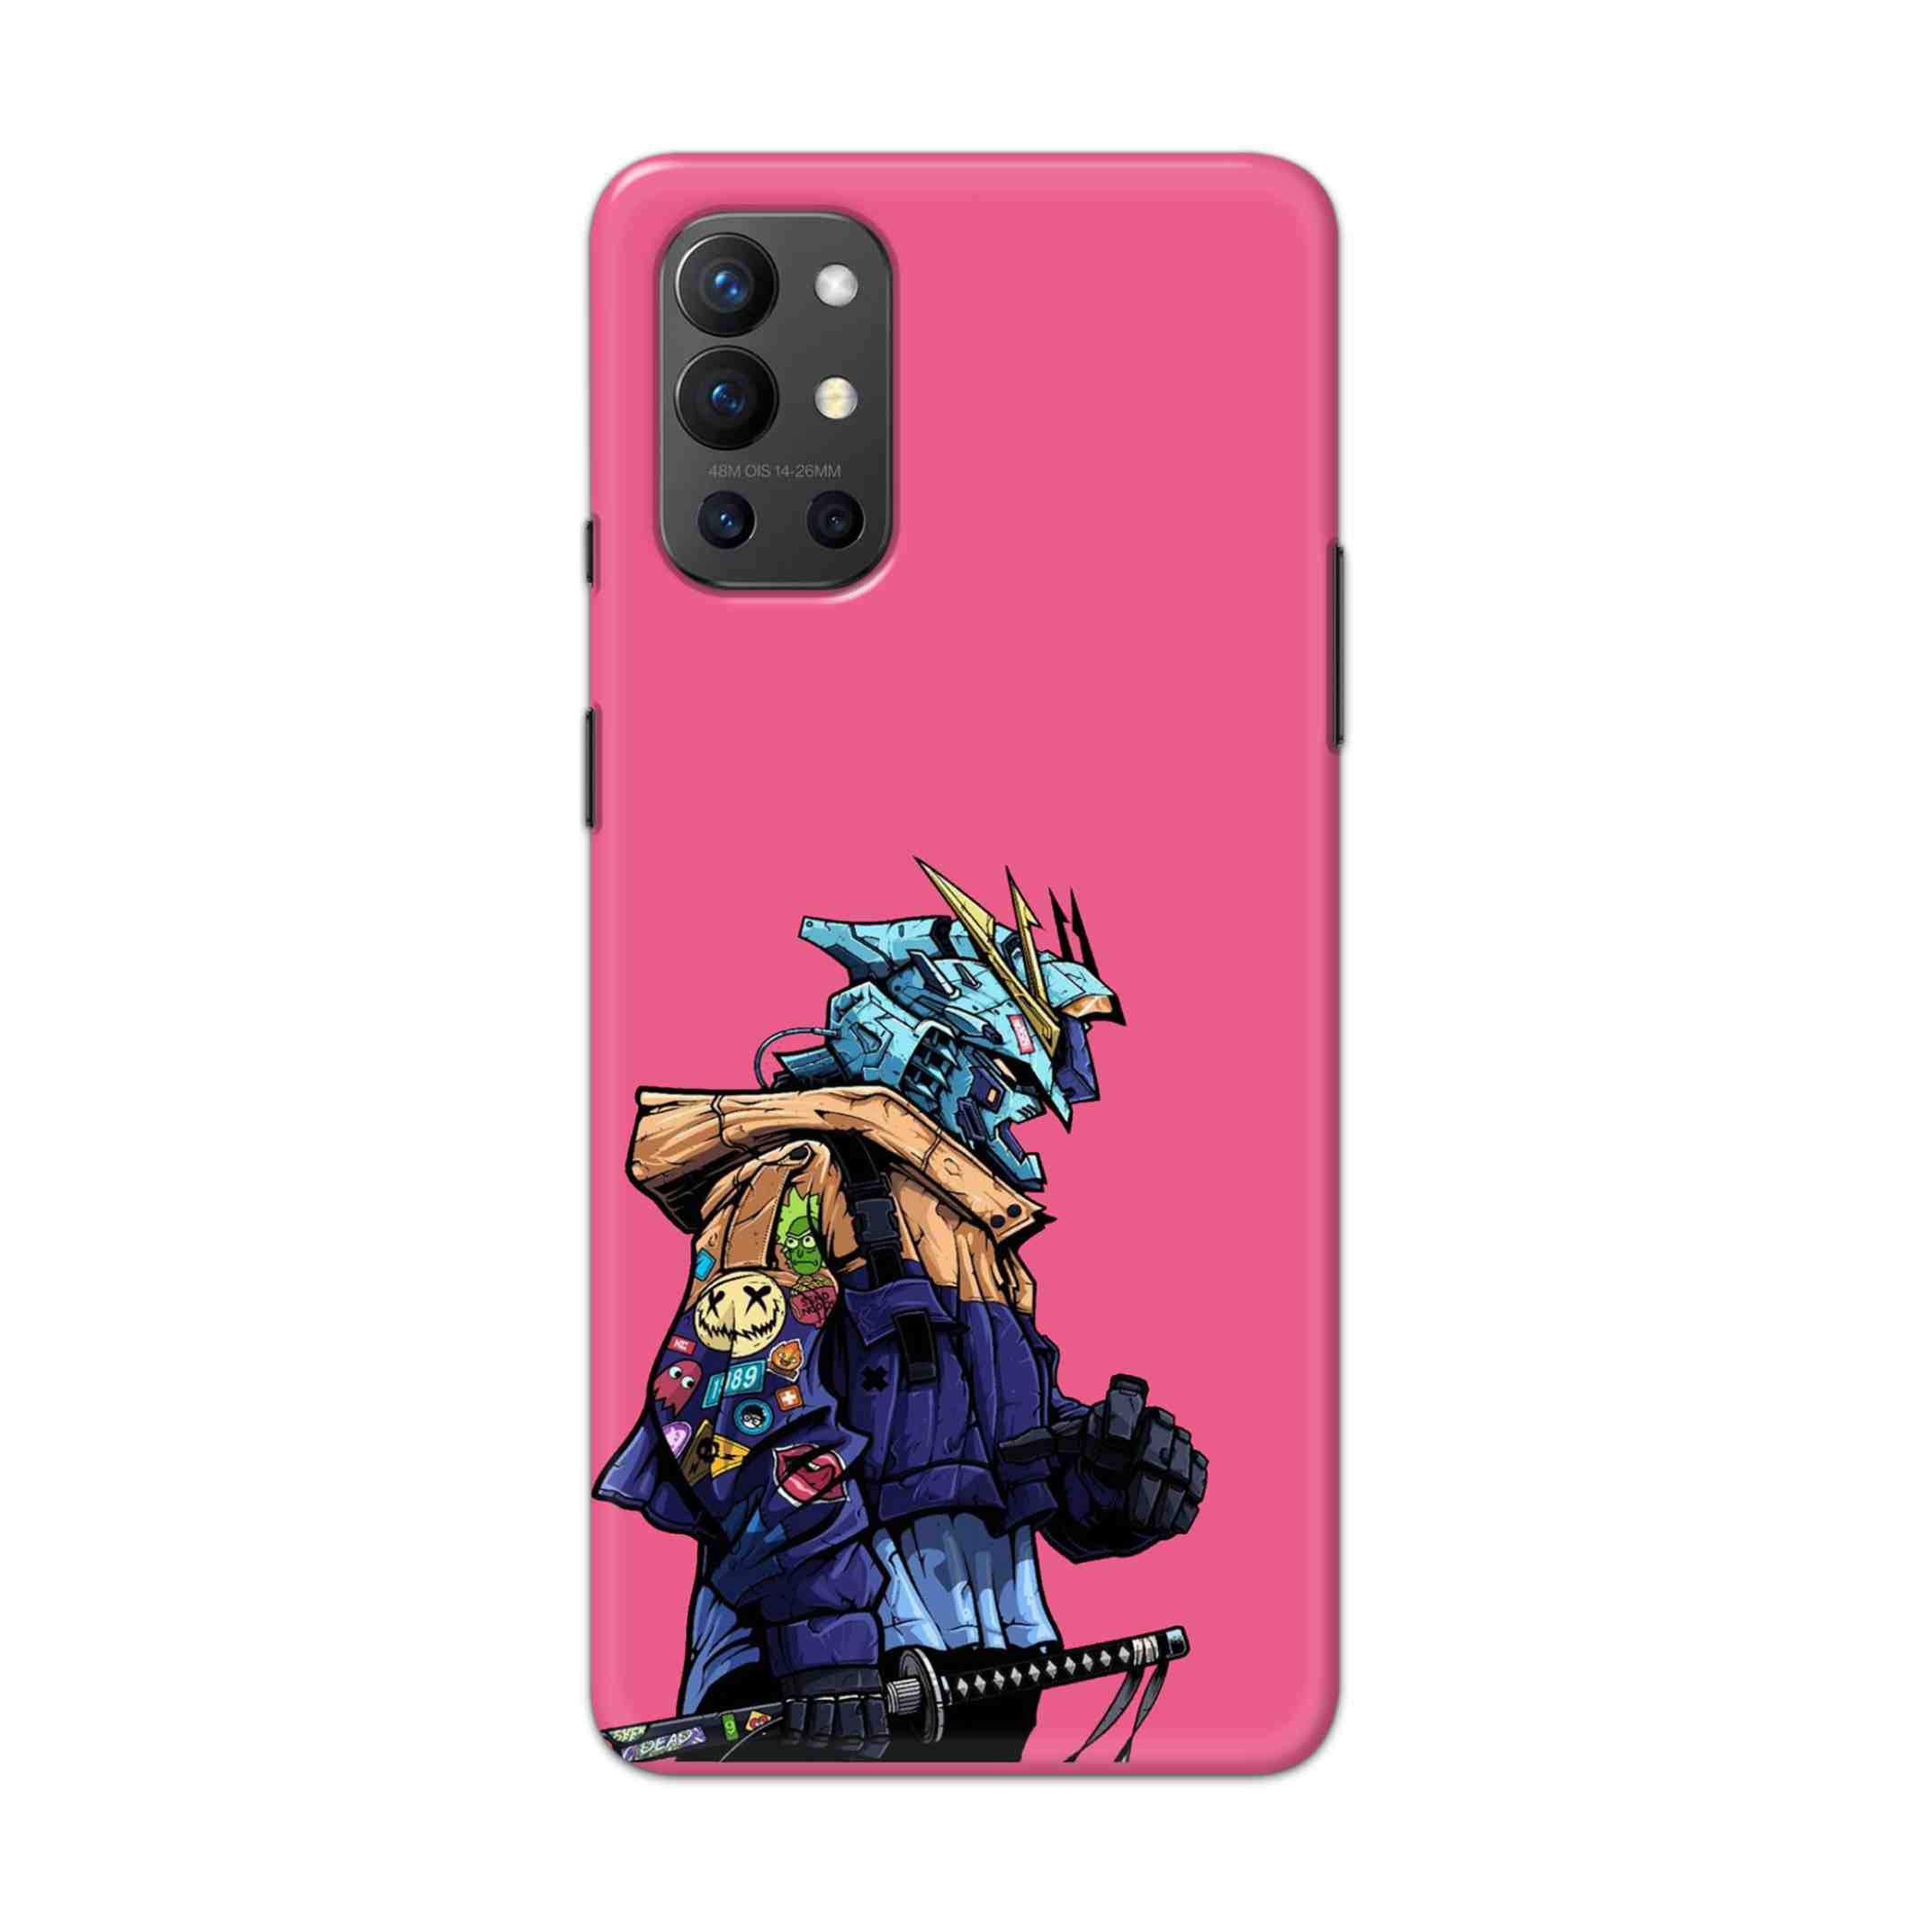 Buy Sword Man Hard Back Mobile Phone Case Cover For OnePlus 9R / 8T Online